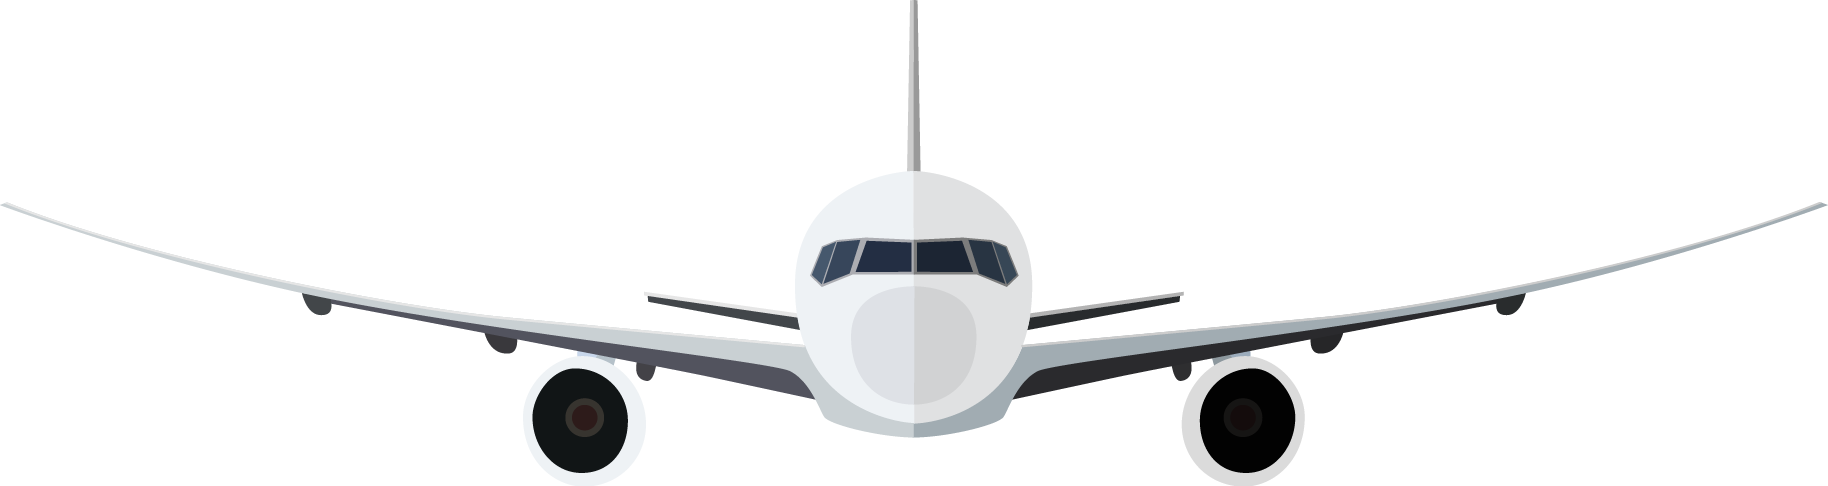 Free Airplane Front View Clip Art